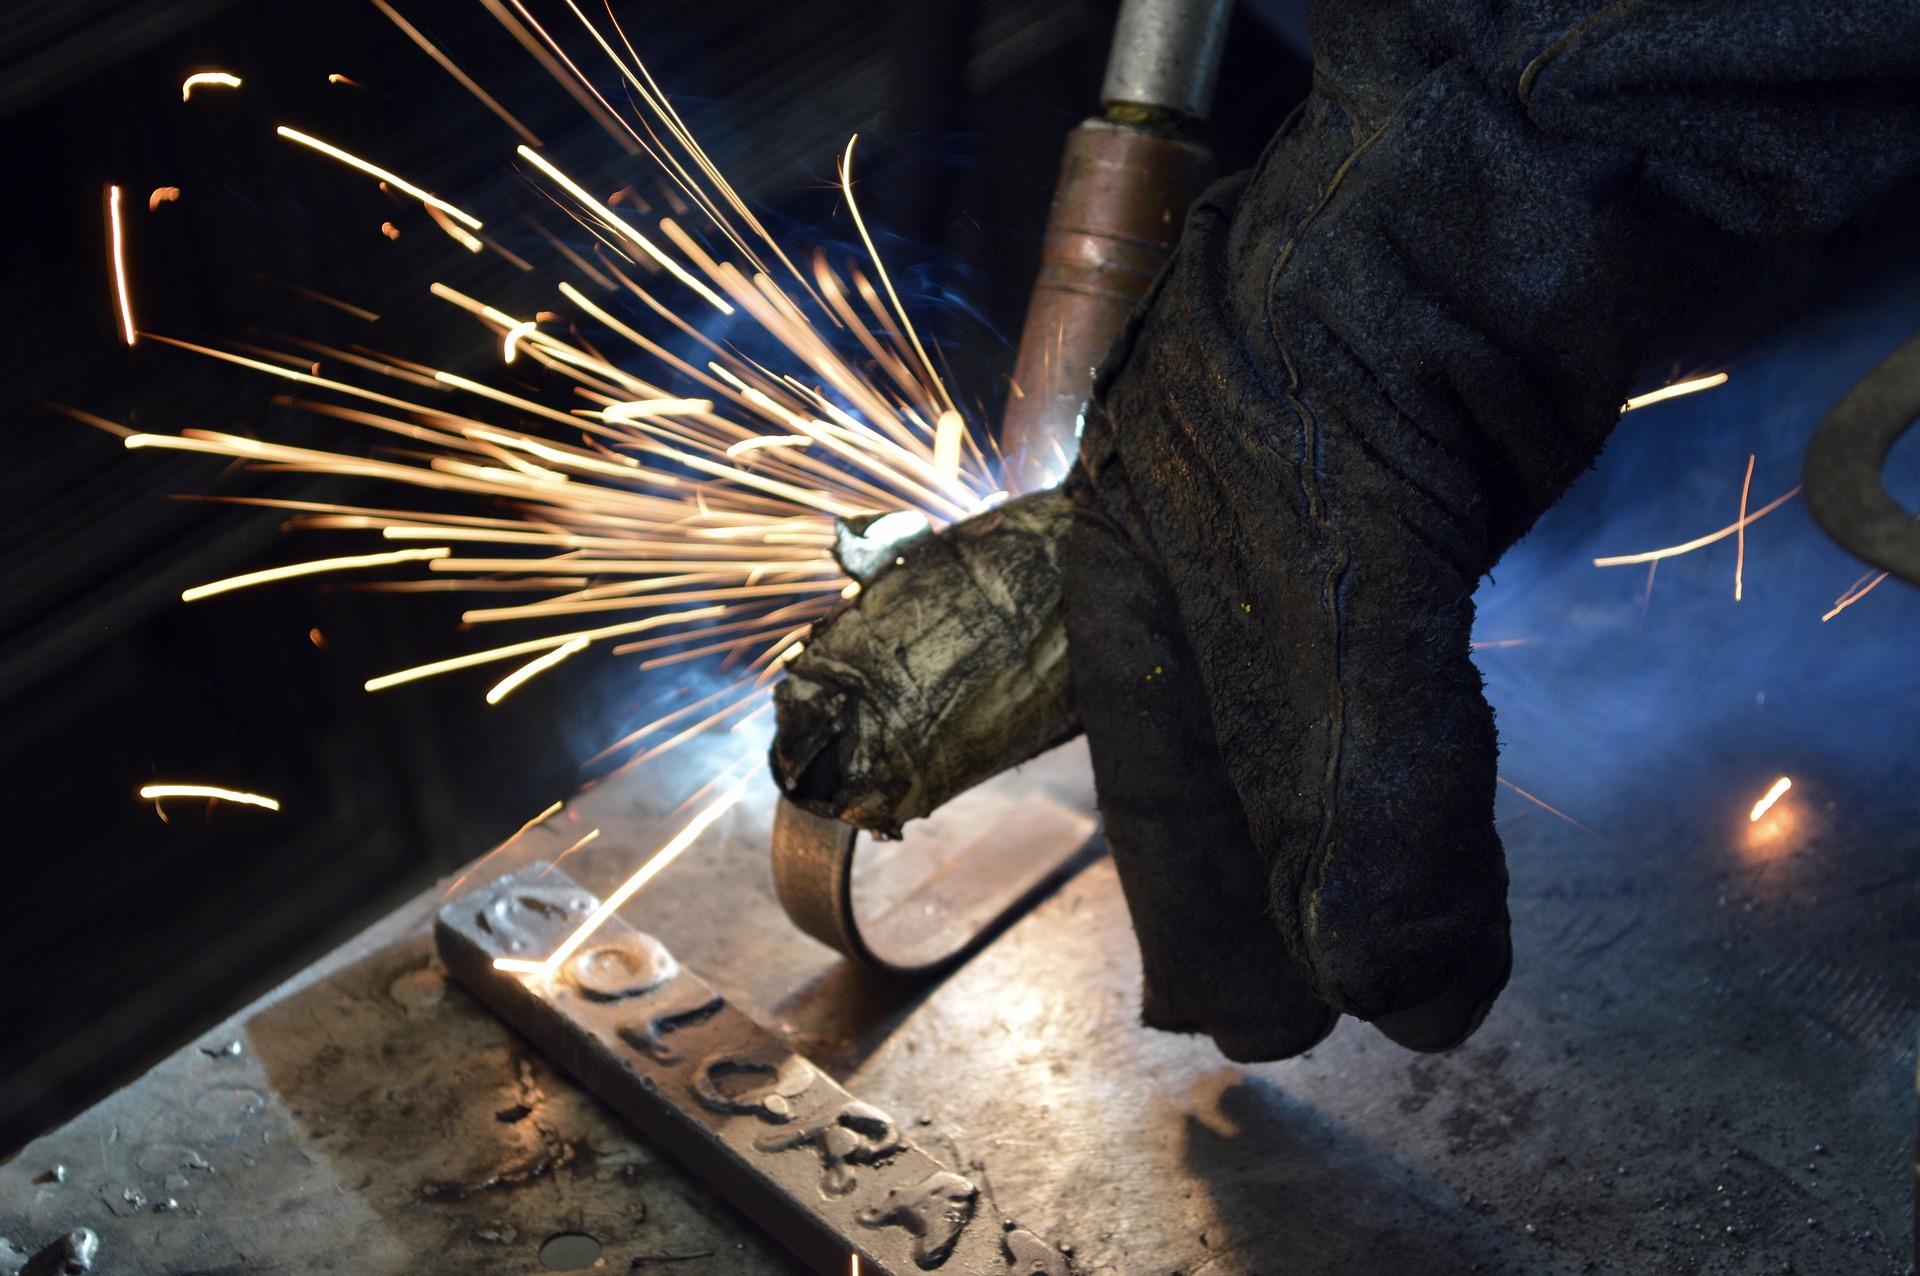 Common Mistakes to Avoid When Choosing a Welding Machine